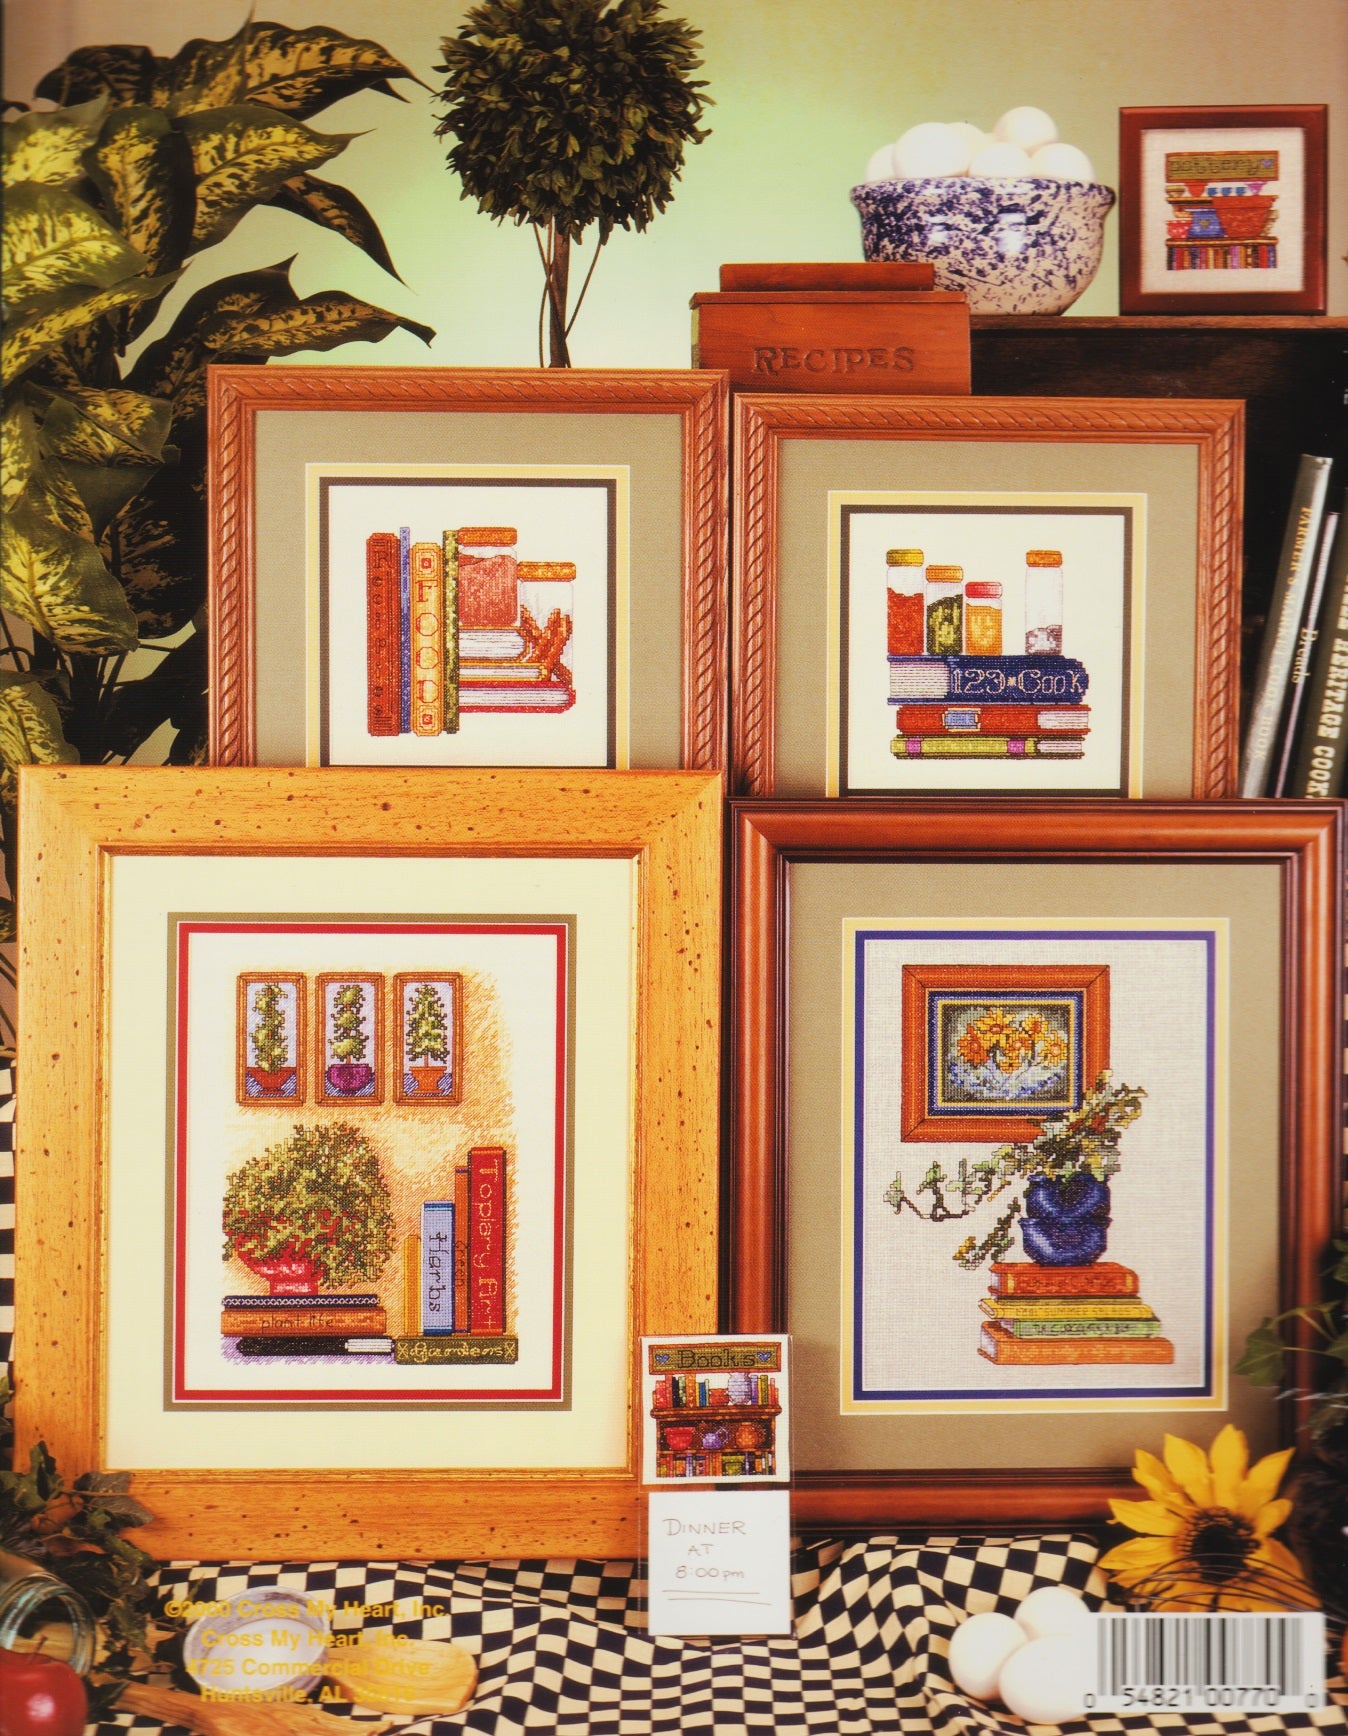 The Kitchen Library pattern